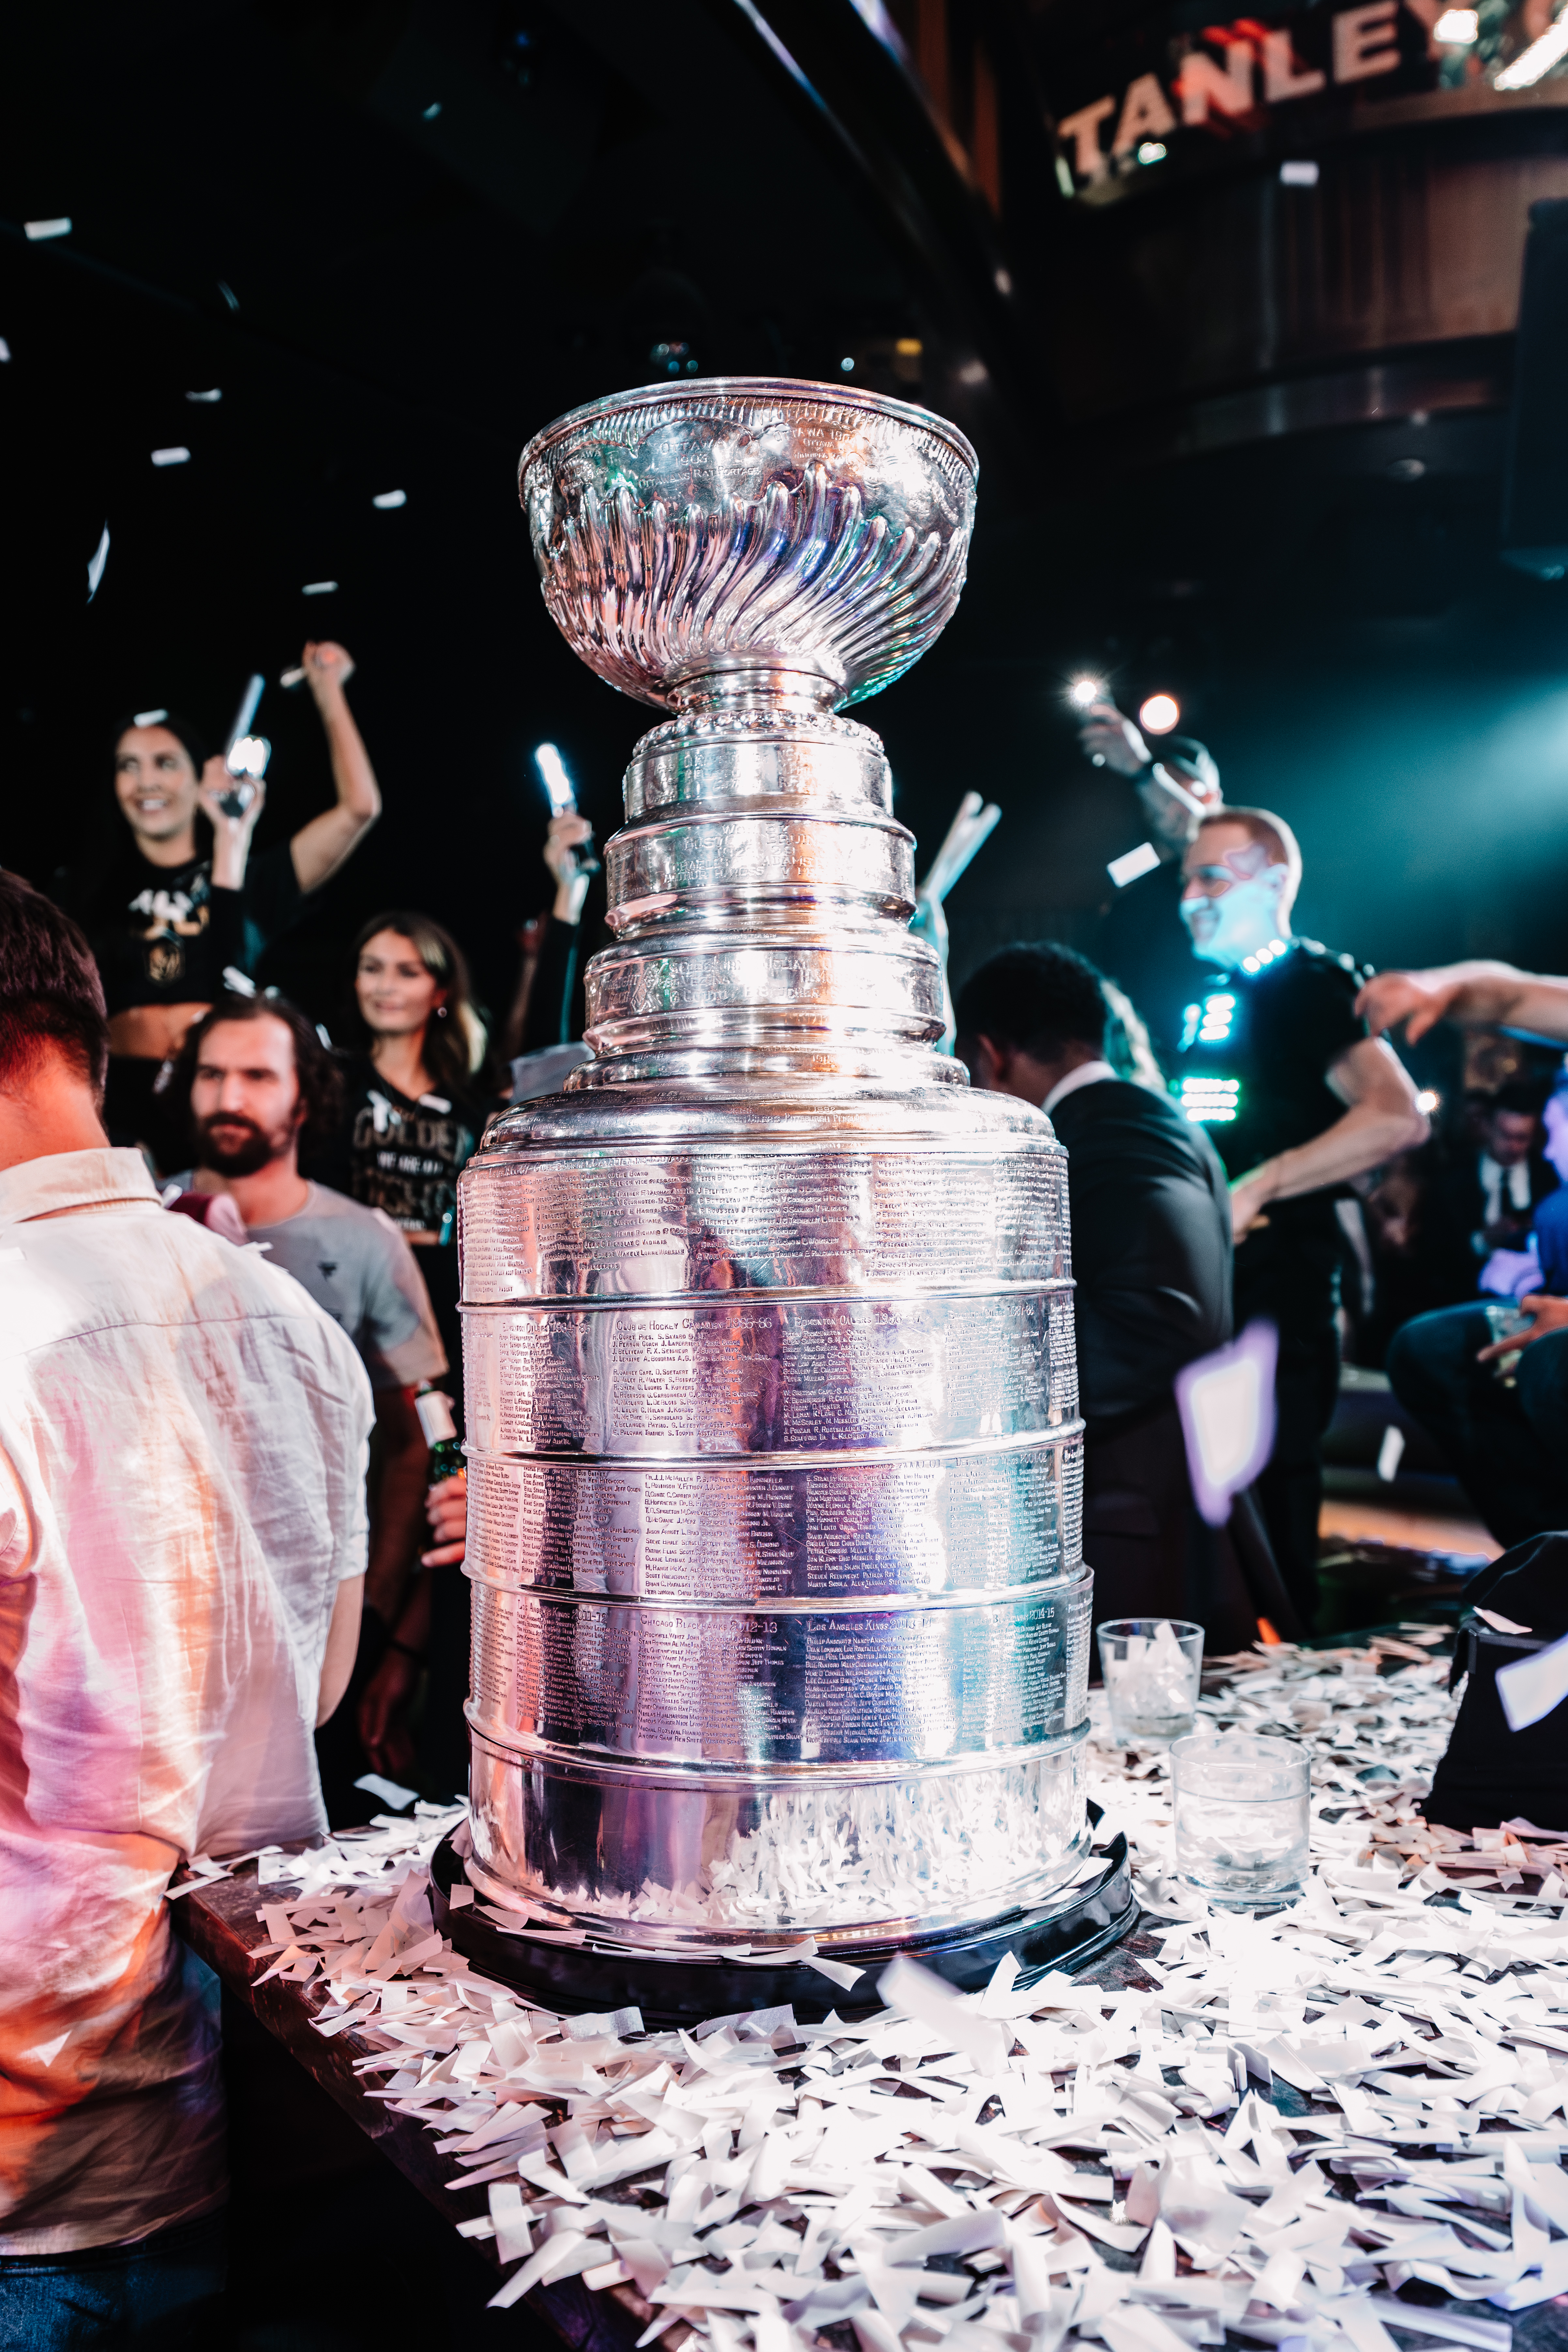 Golden Knights bring Stanley Cup party to downtown Las Vegas, Kats, Entertainment